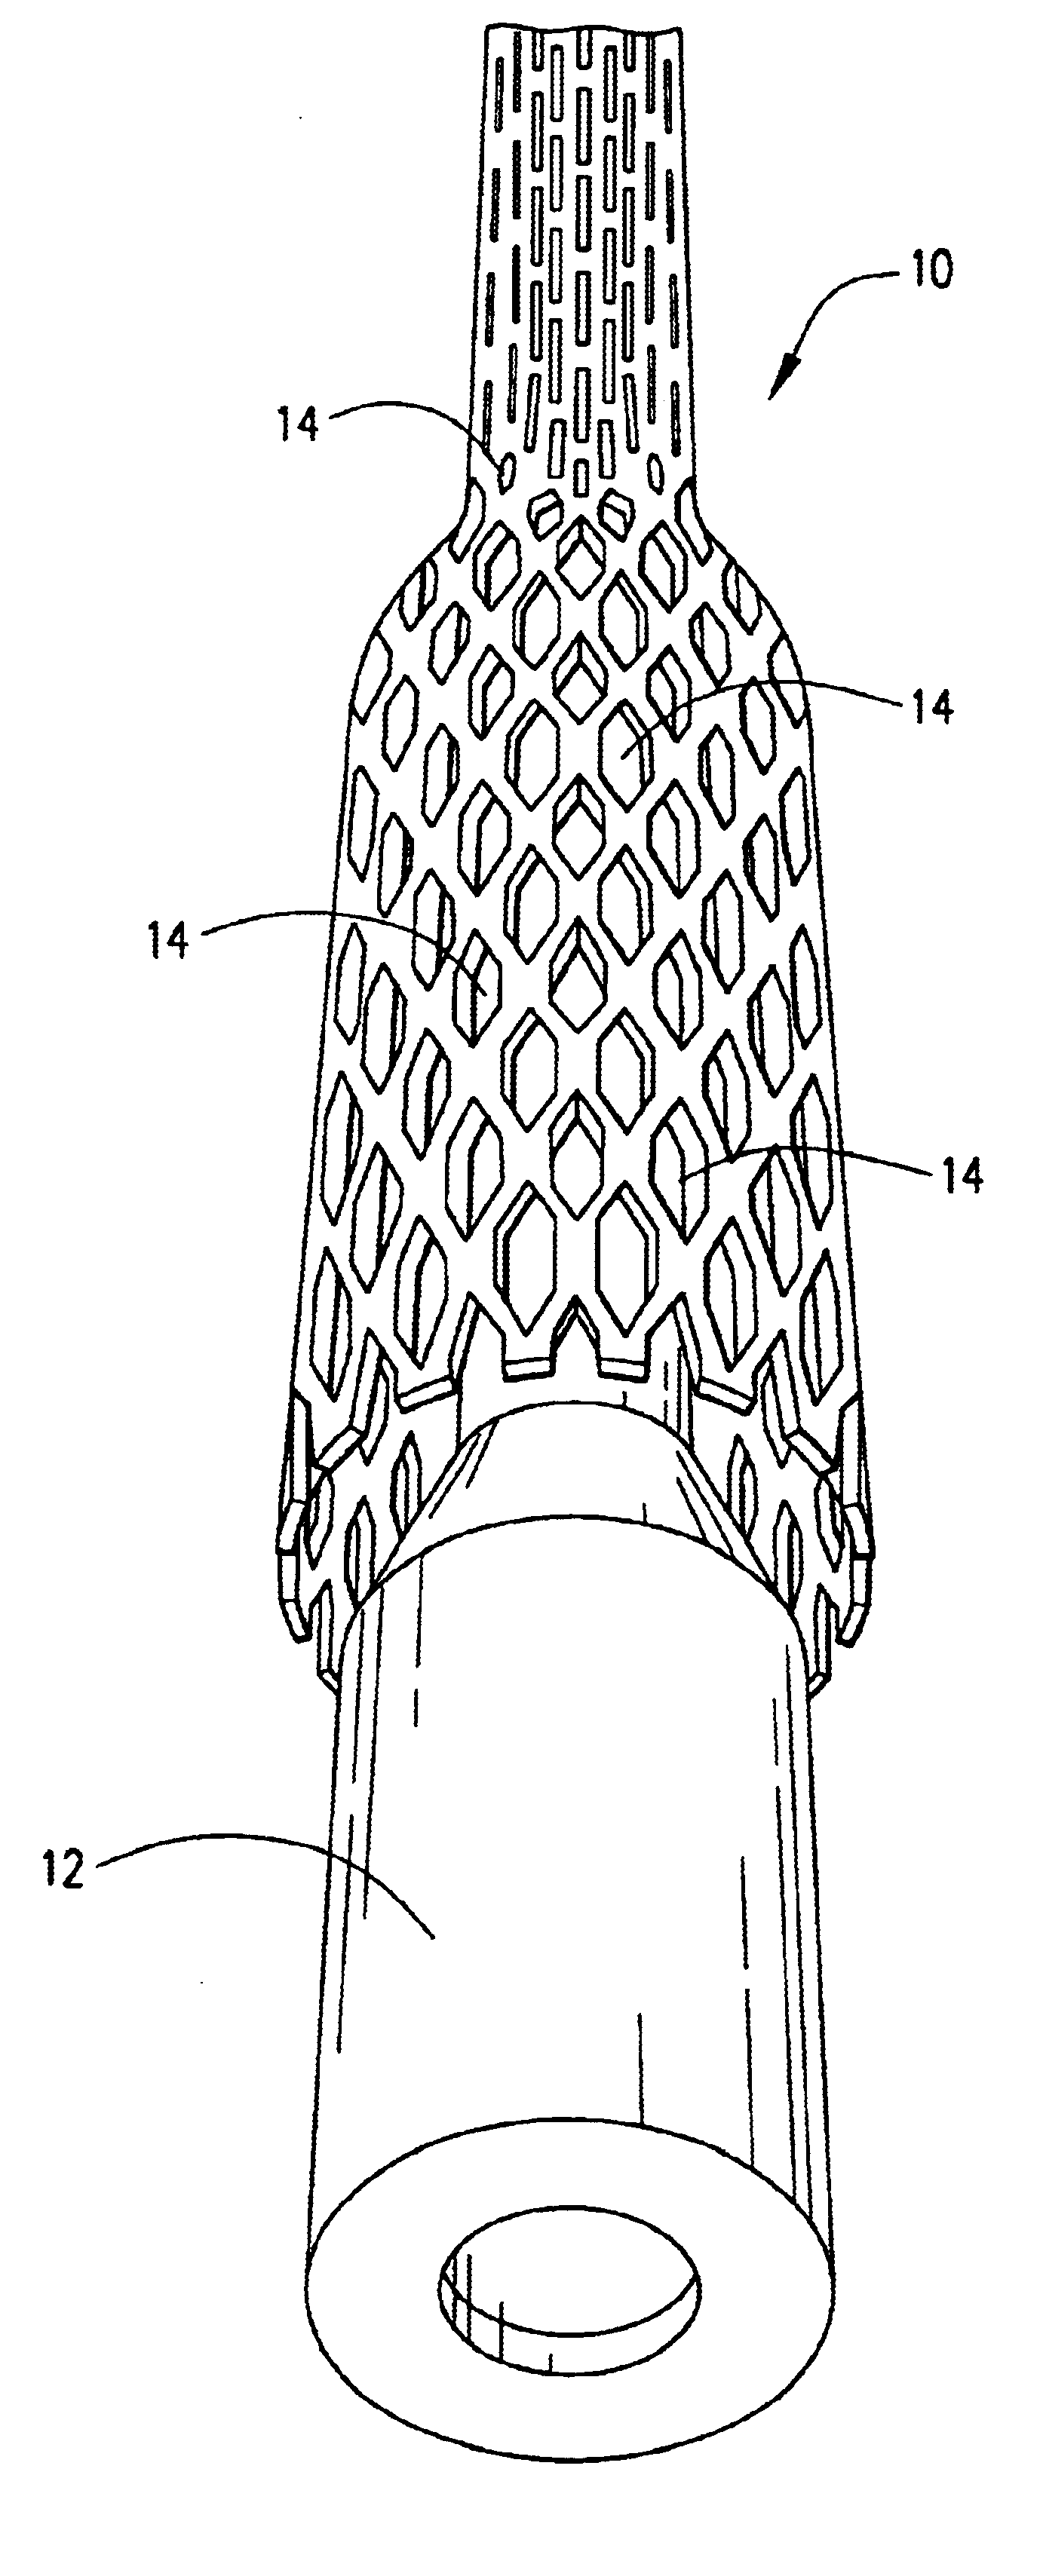 Methods and compositions for forming permeable cement sand screens in wells